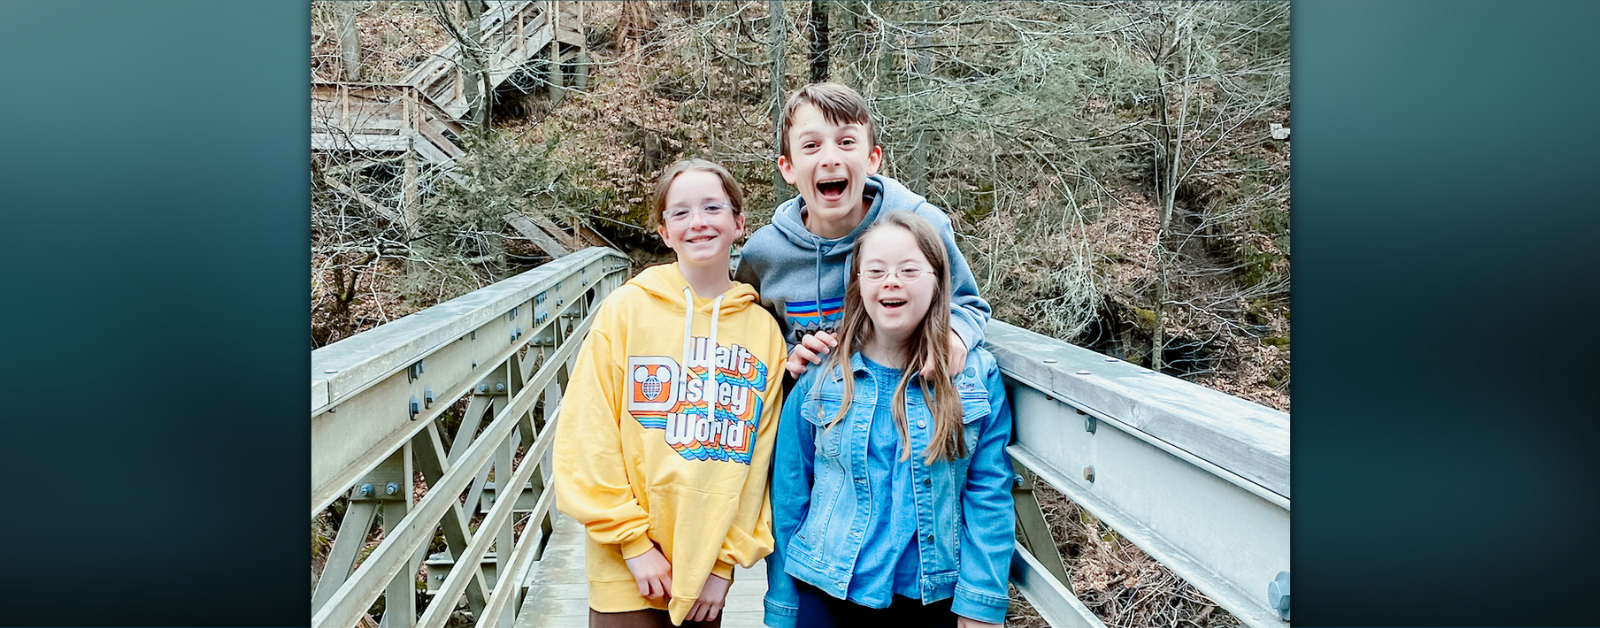 Marilee, William, and Penny smile happily at the camera while they stand on a wood bridge with a forest hill in the background